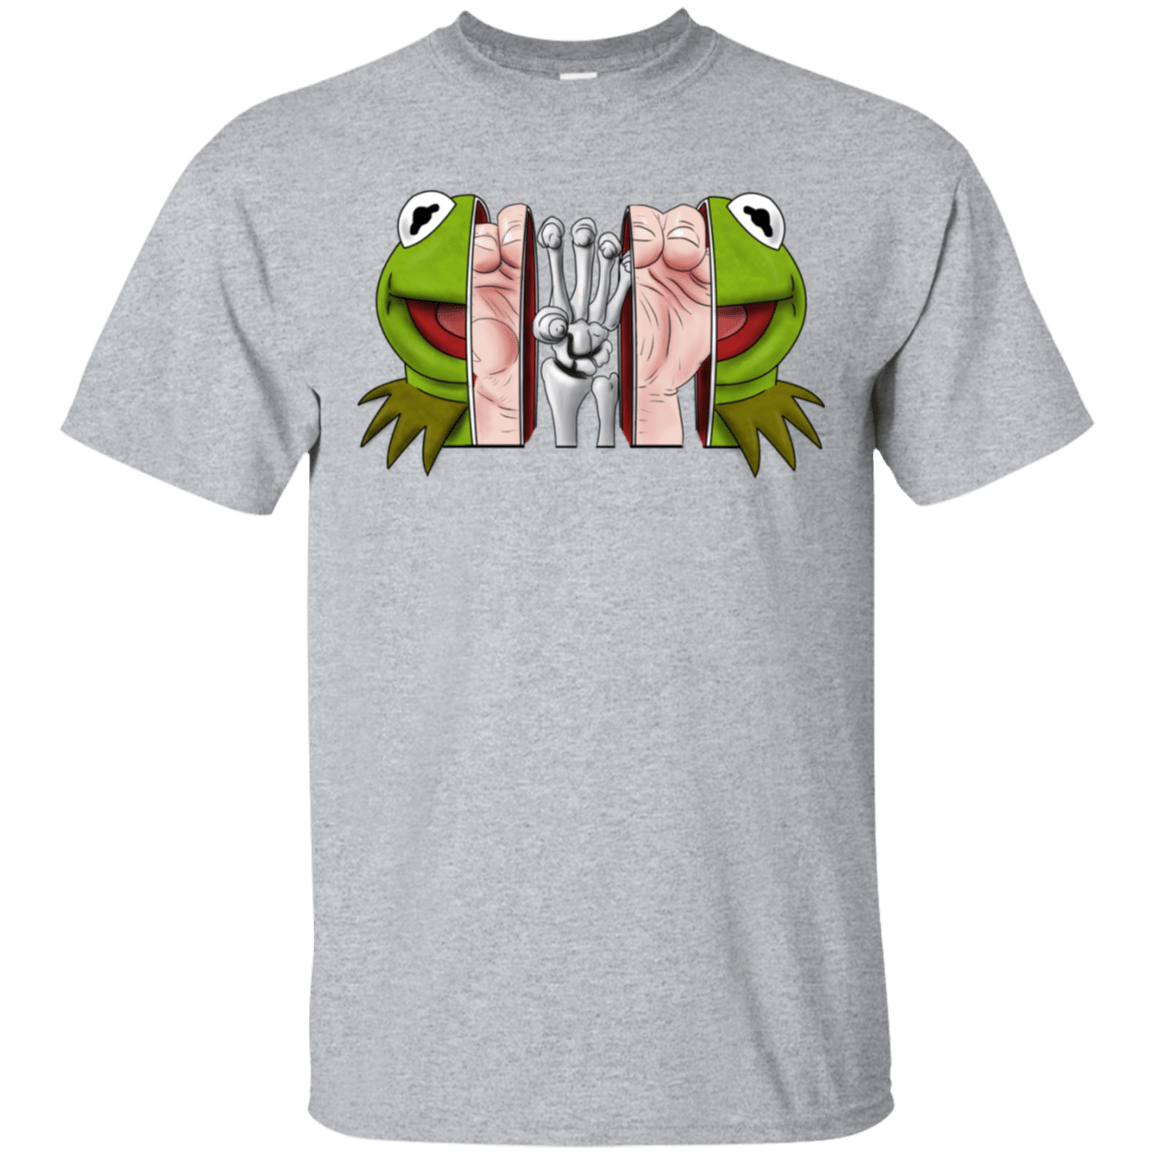 T-Shirts Sport Grey / S Inside the Frog T-Shirt